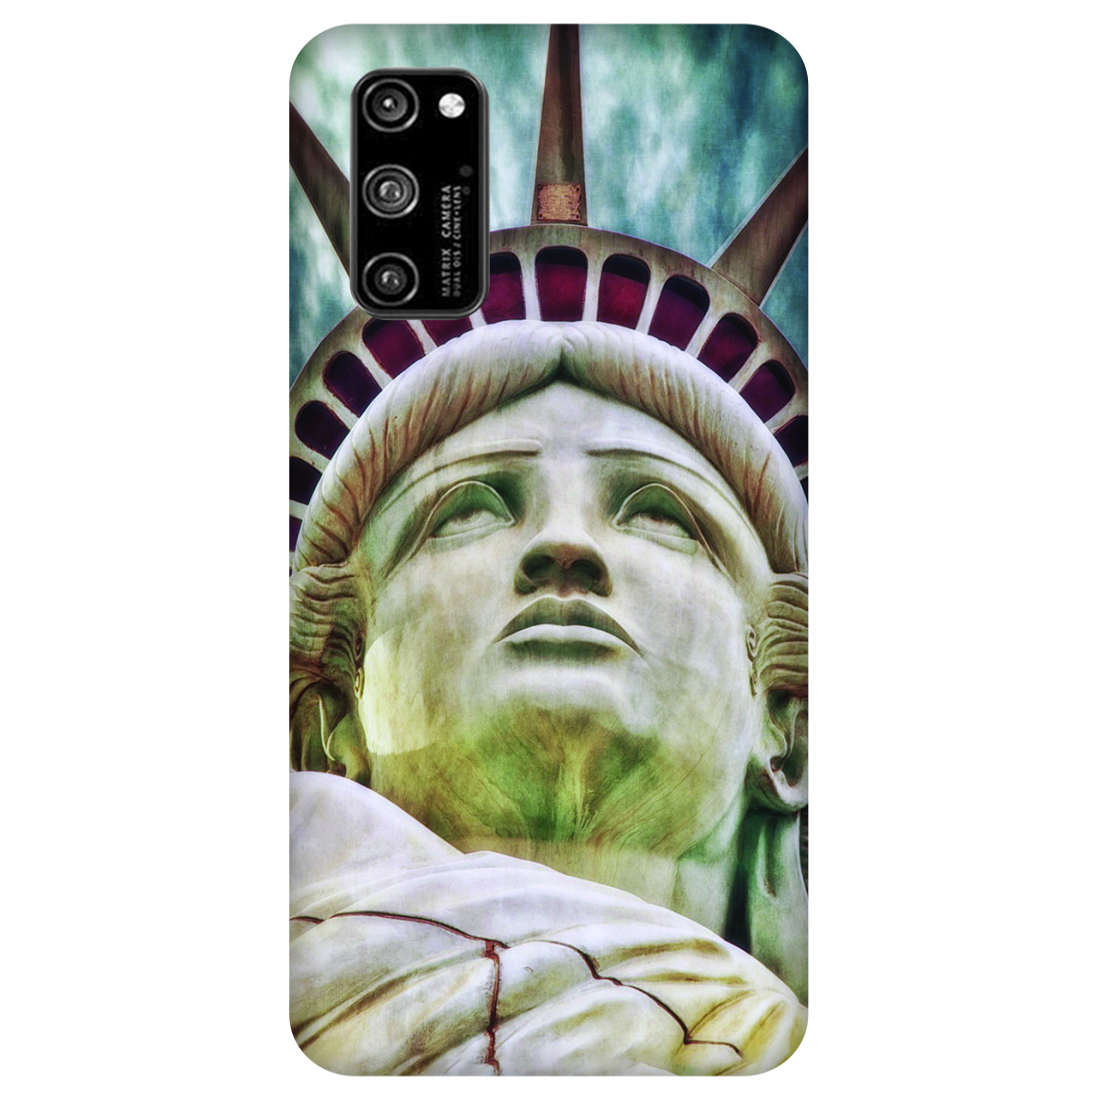 Statue of Liberty Case Honor V30 Pro 5G